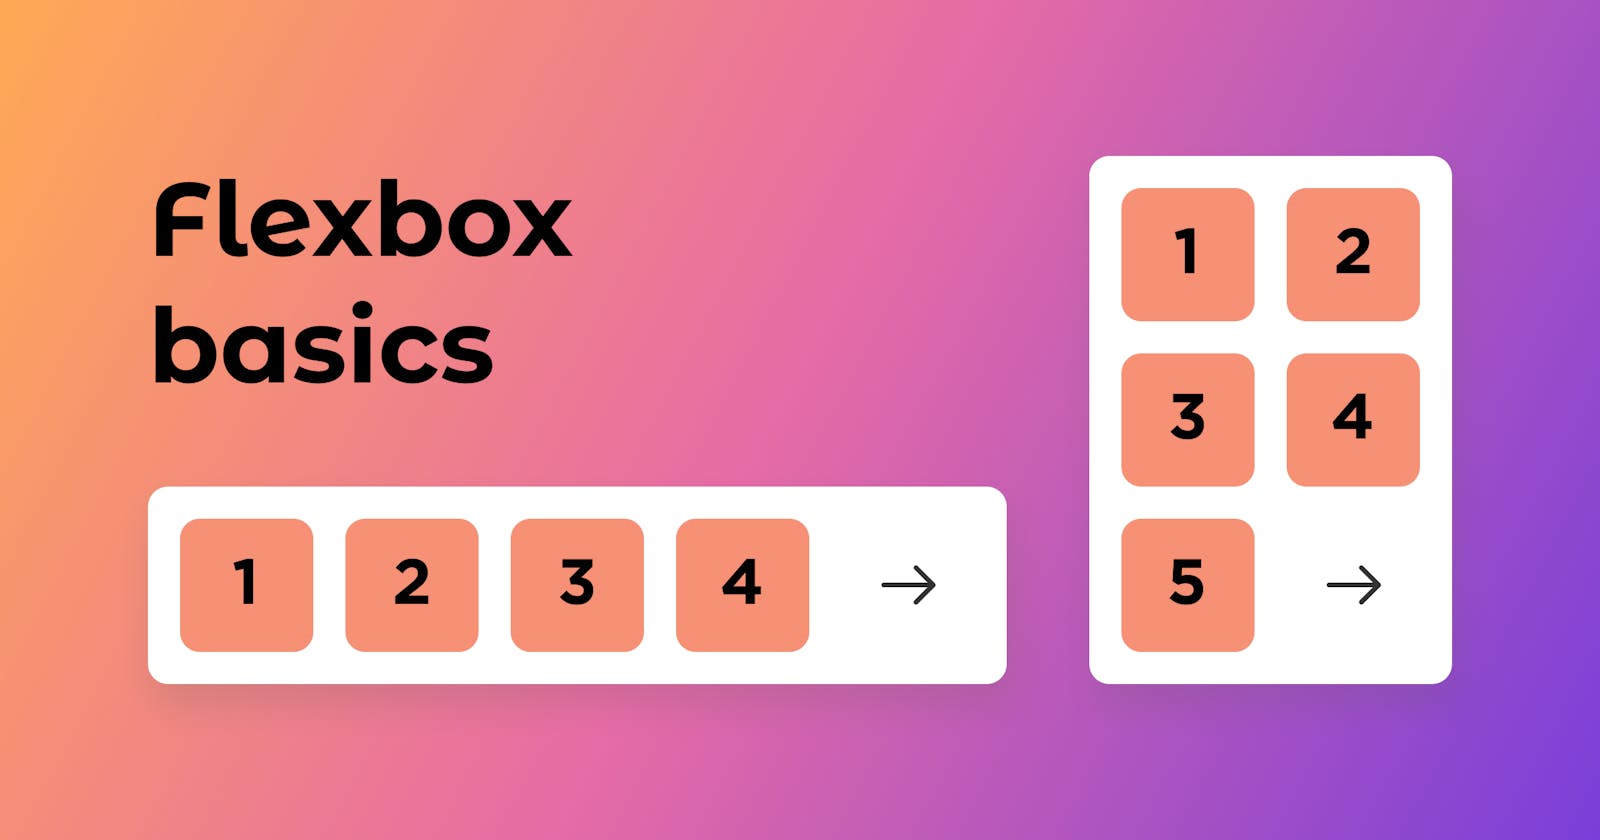 Get started with Flexbox.